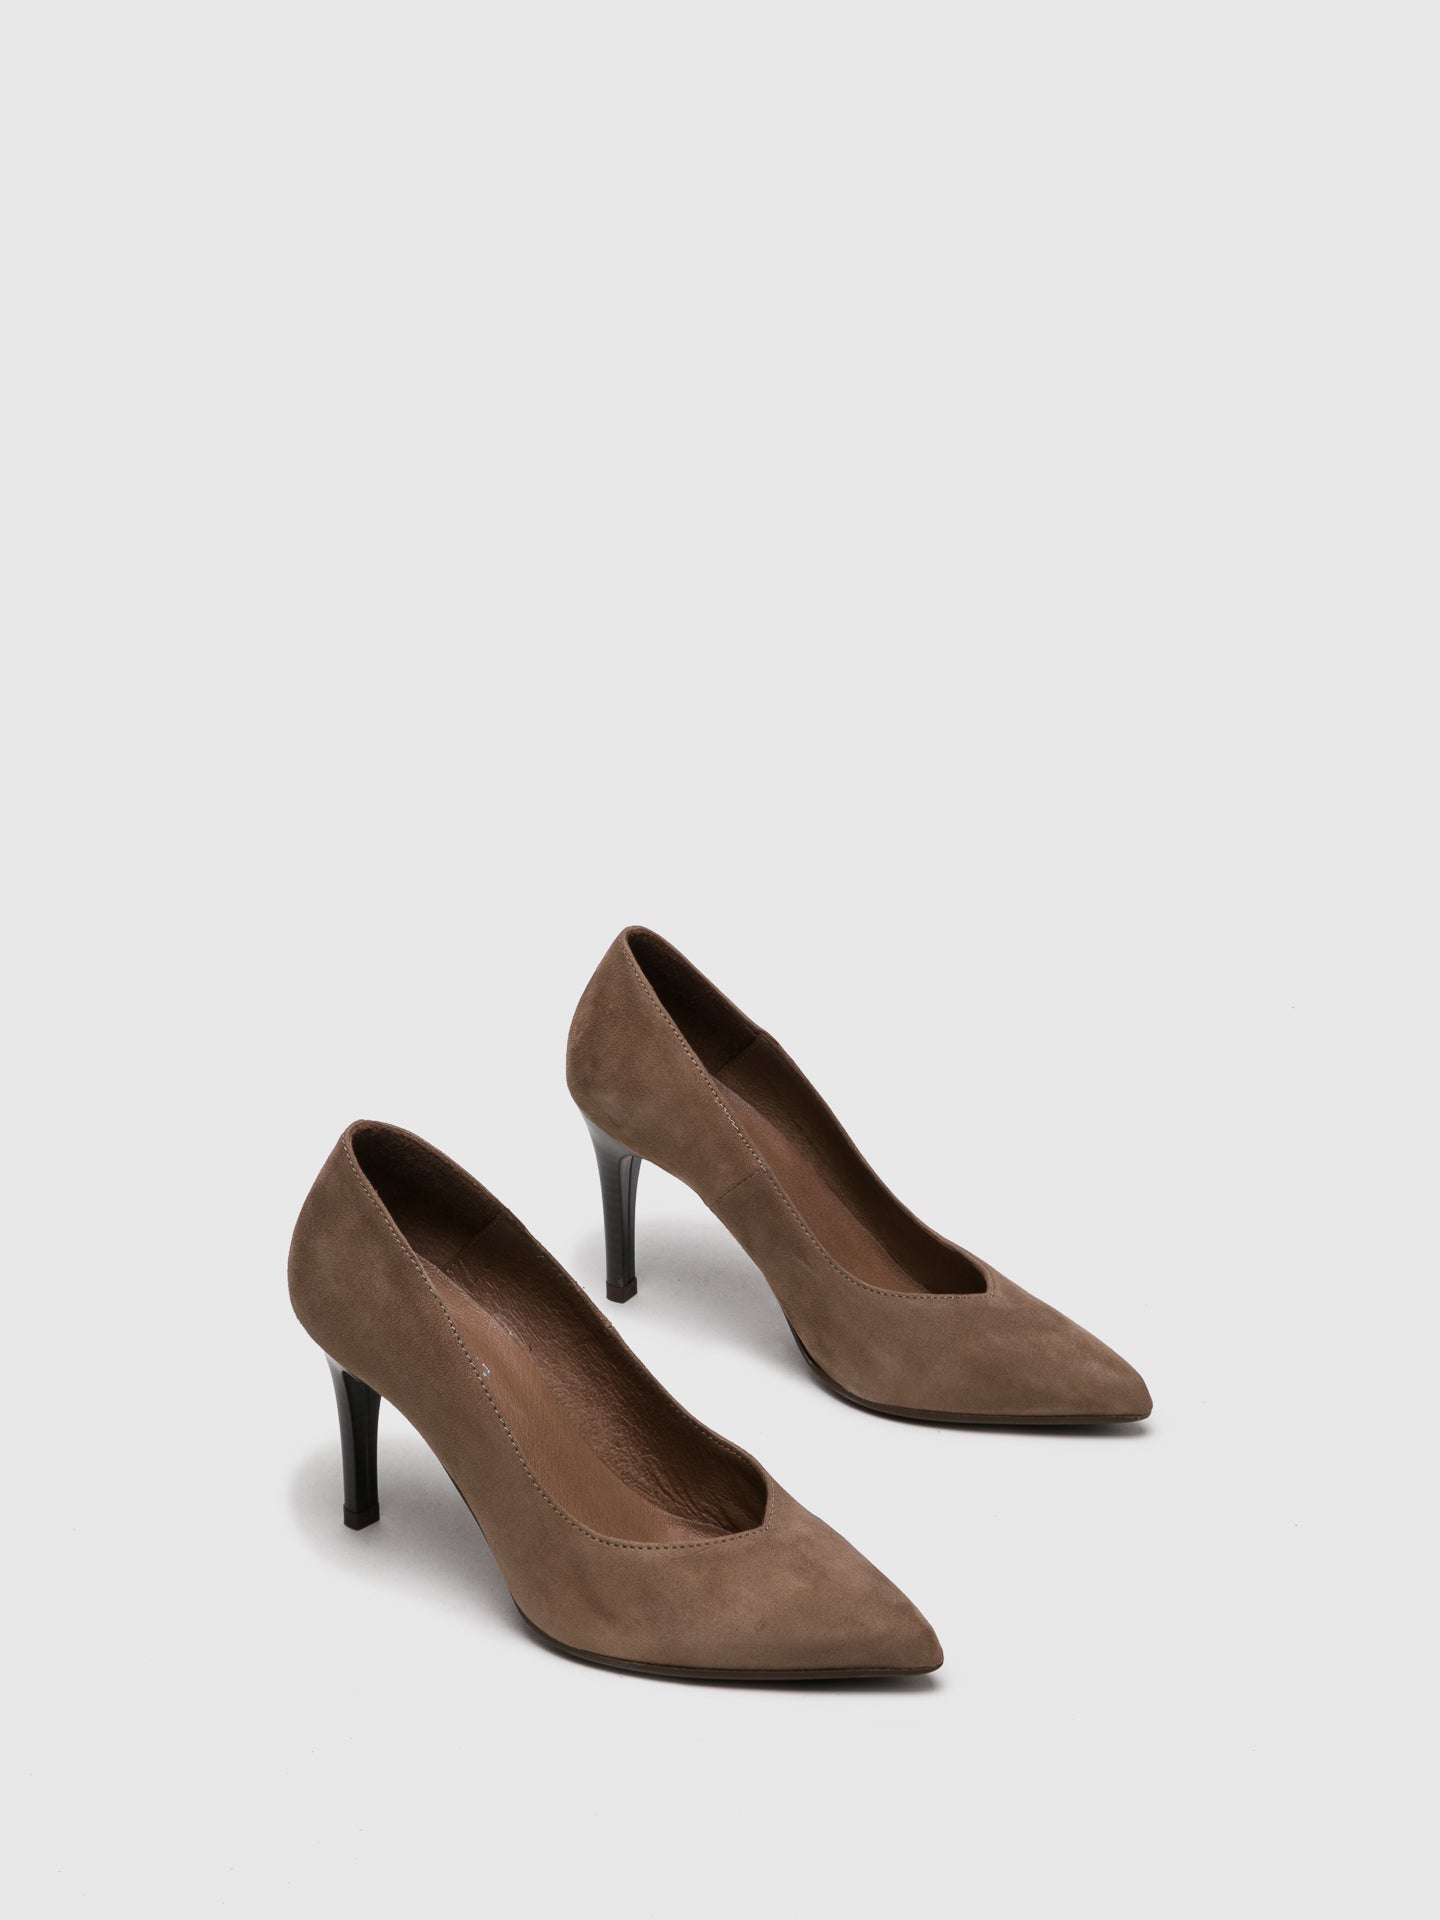 Foreva Wheat Pointed Toe Pumps